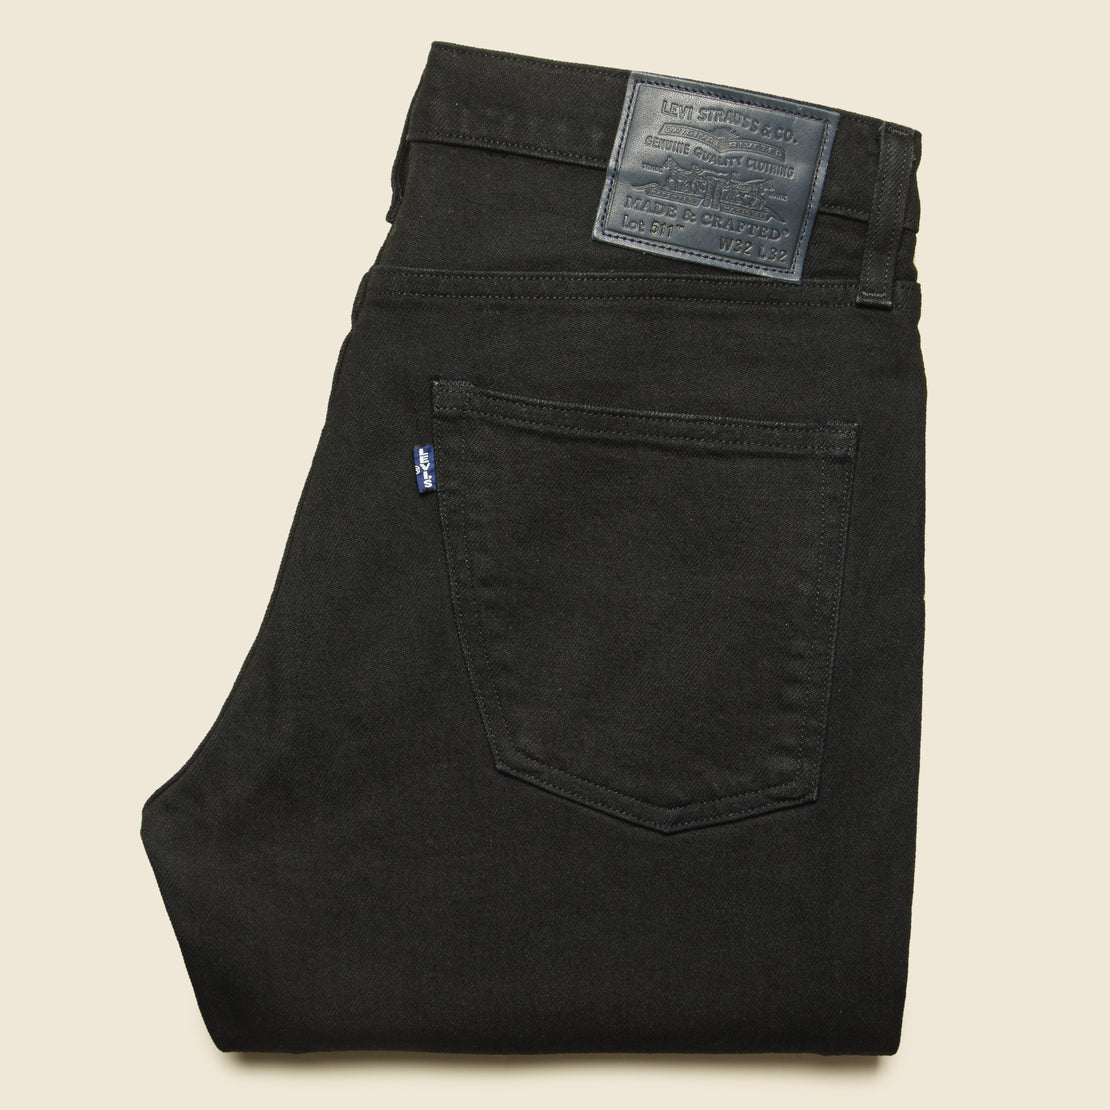 511 Slim Fit Jean - Black Rinse - Levis Made & Crafted - STAG Provisions - Pants - Denim